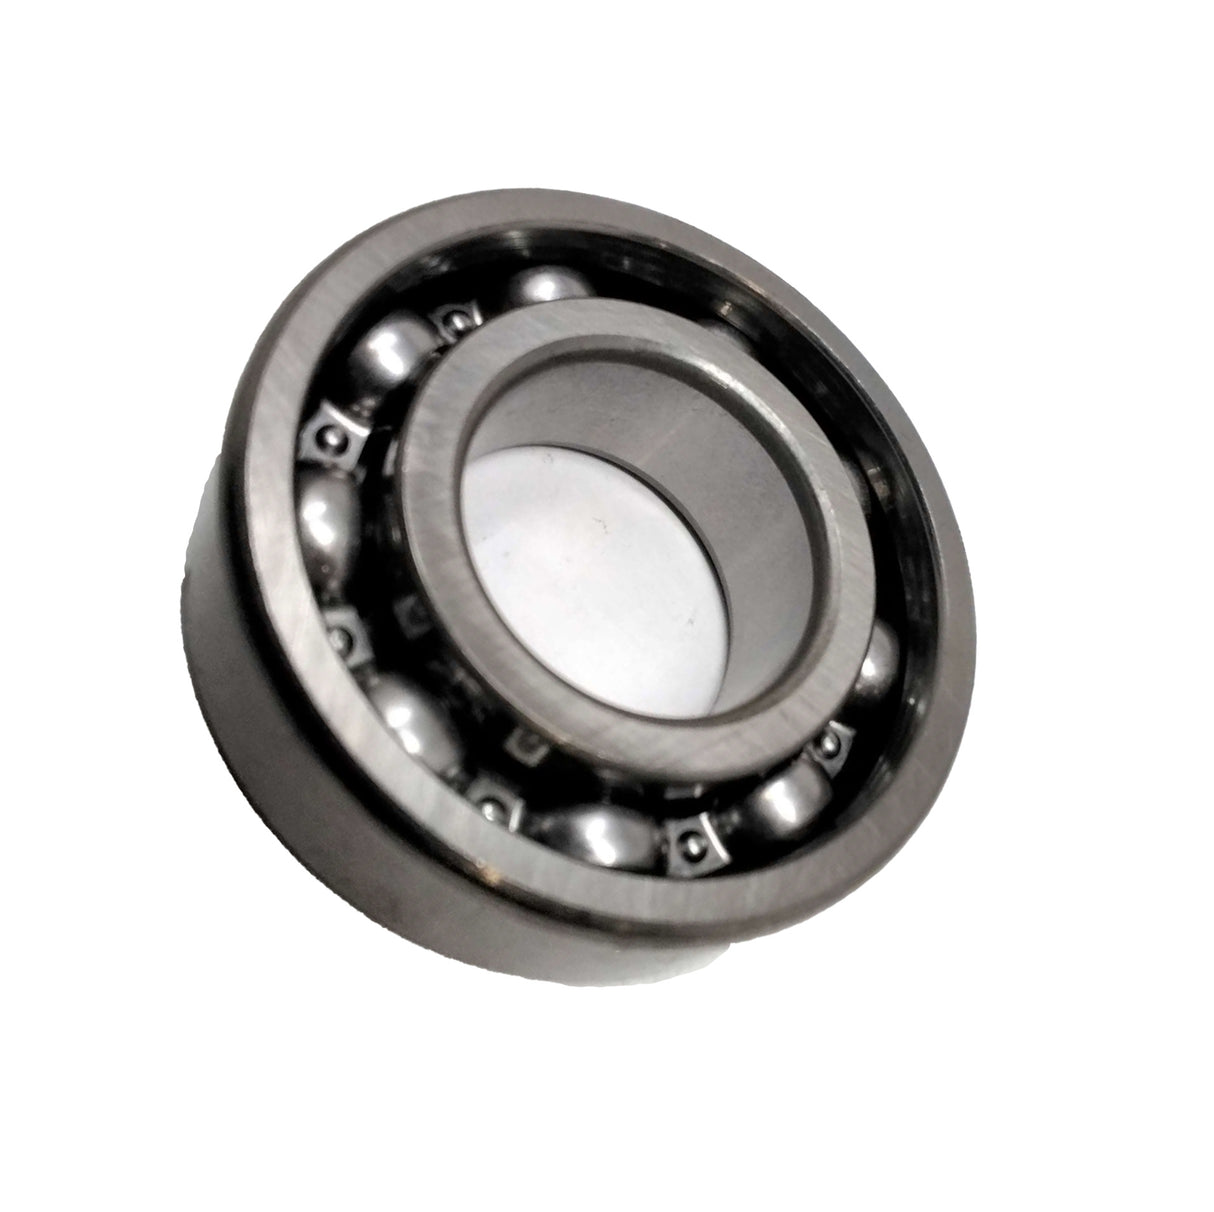 ZF PARTS ­-­ 0635-332-020 ­-­ BALL BEARING - DEEP GROOVE RADIAL 52mm OD